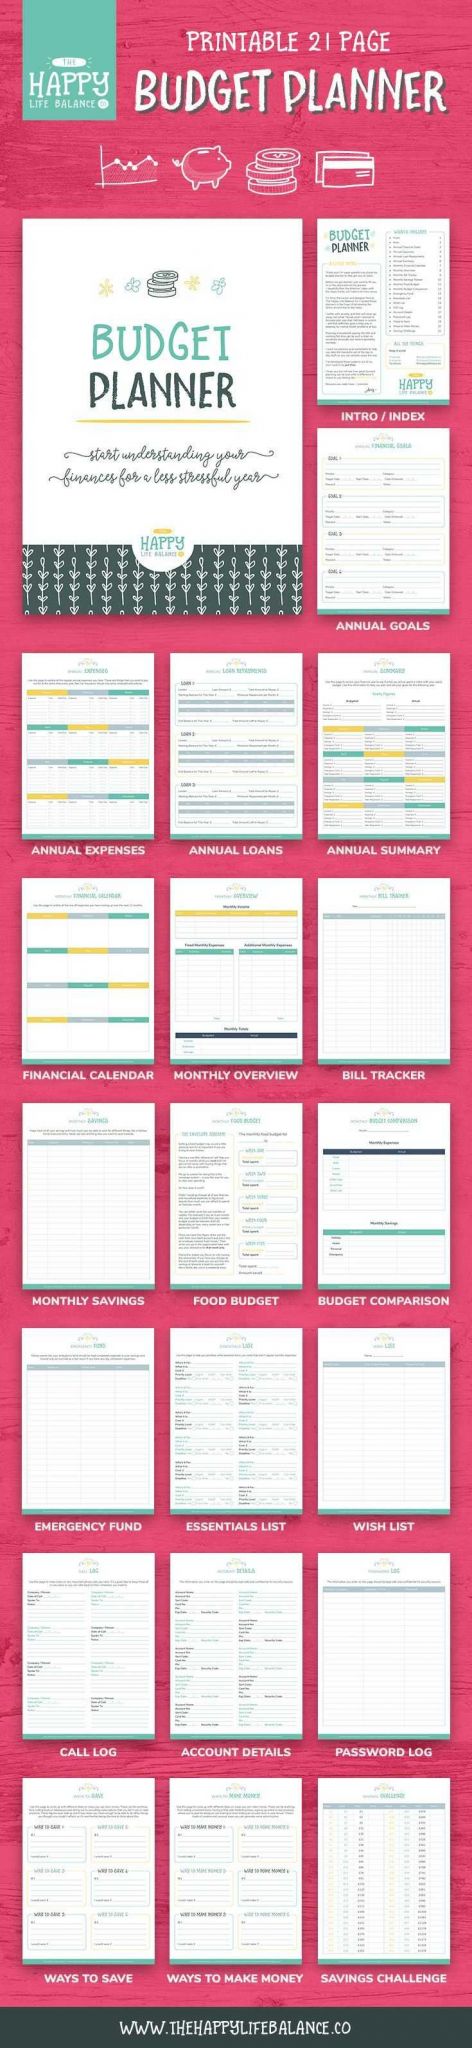 Free Printable Debt Payoff Worksheet together with 1001 Best Bud Ing Images On Pinterest